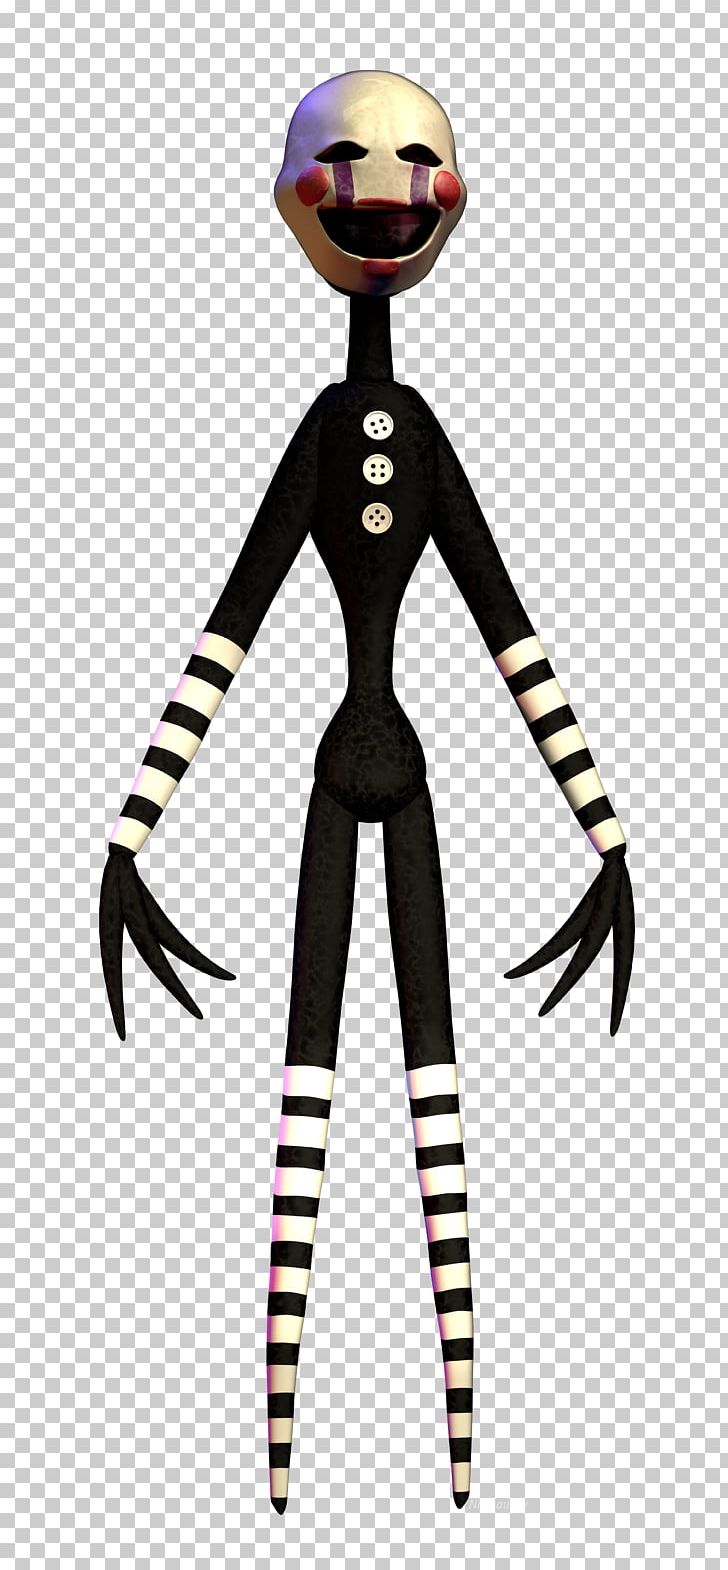 Five Nights At Freddy's 2 Five Nights At Freddy's: Sister Location Five Nights At Freddy's 3 Puppet PNG, Clipart, Animation, Character, Doll, Fictional Character, Five Nights At Freddys Free PNG Download